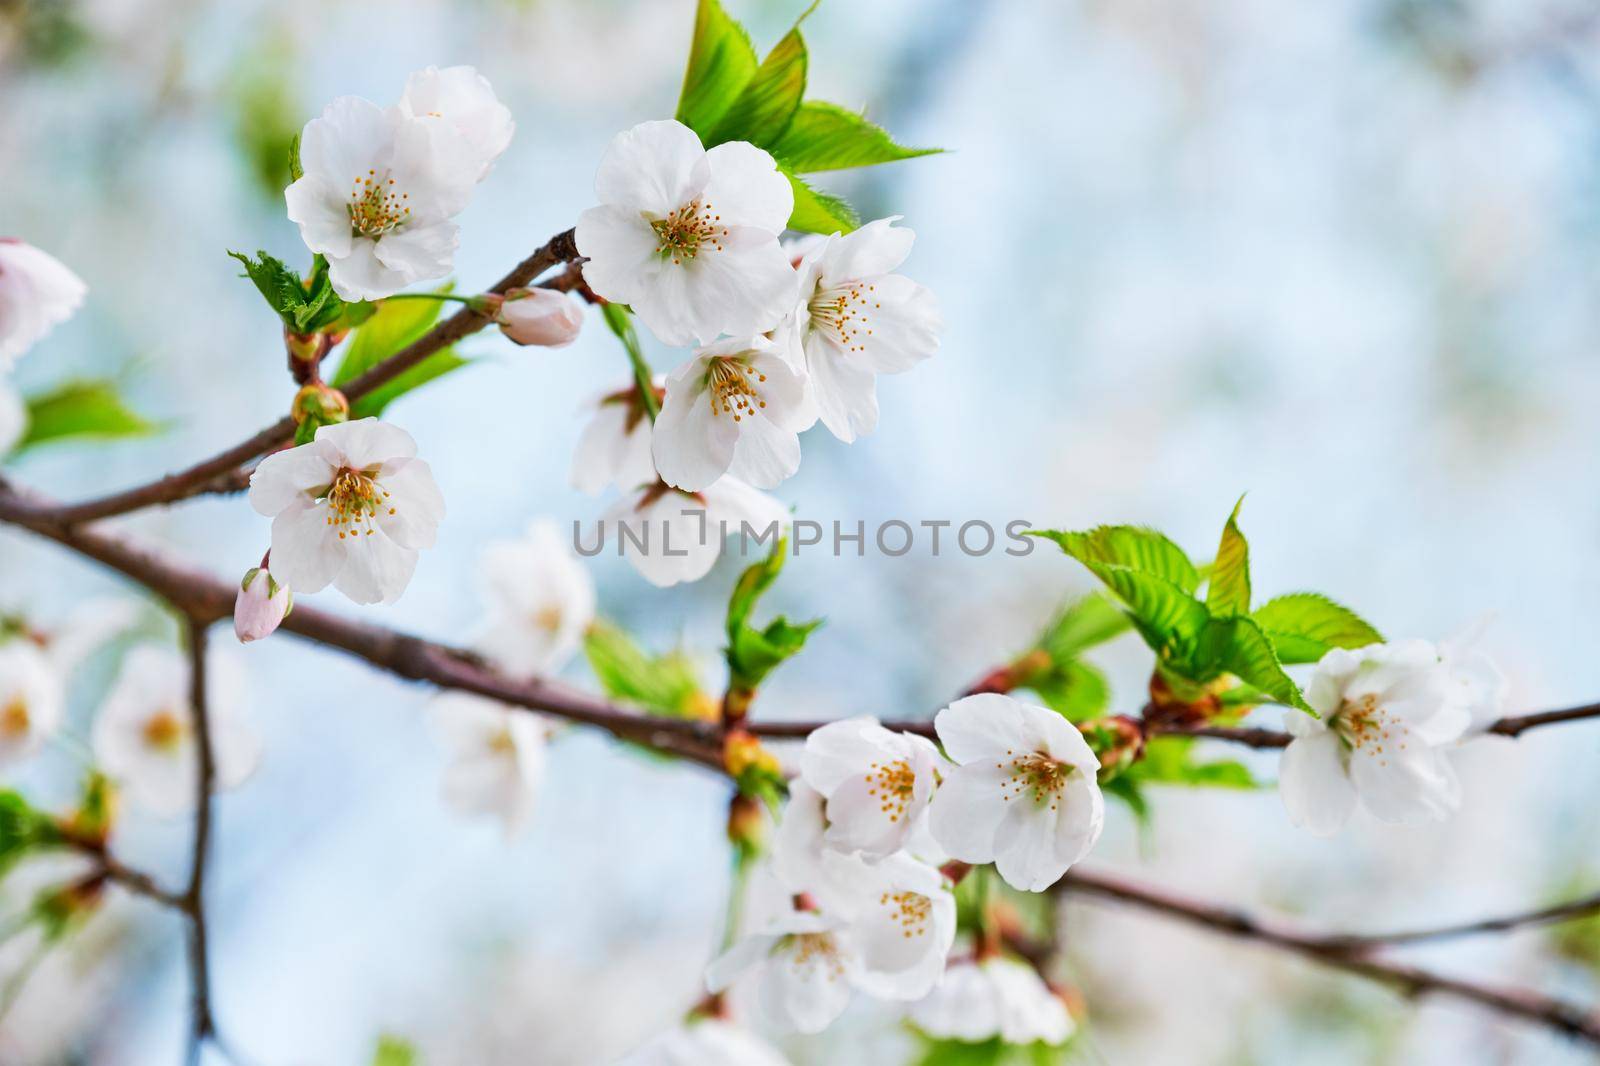 Blooming sakura cherry blossom close up background in spring, South Korea